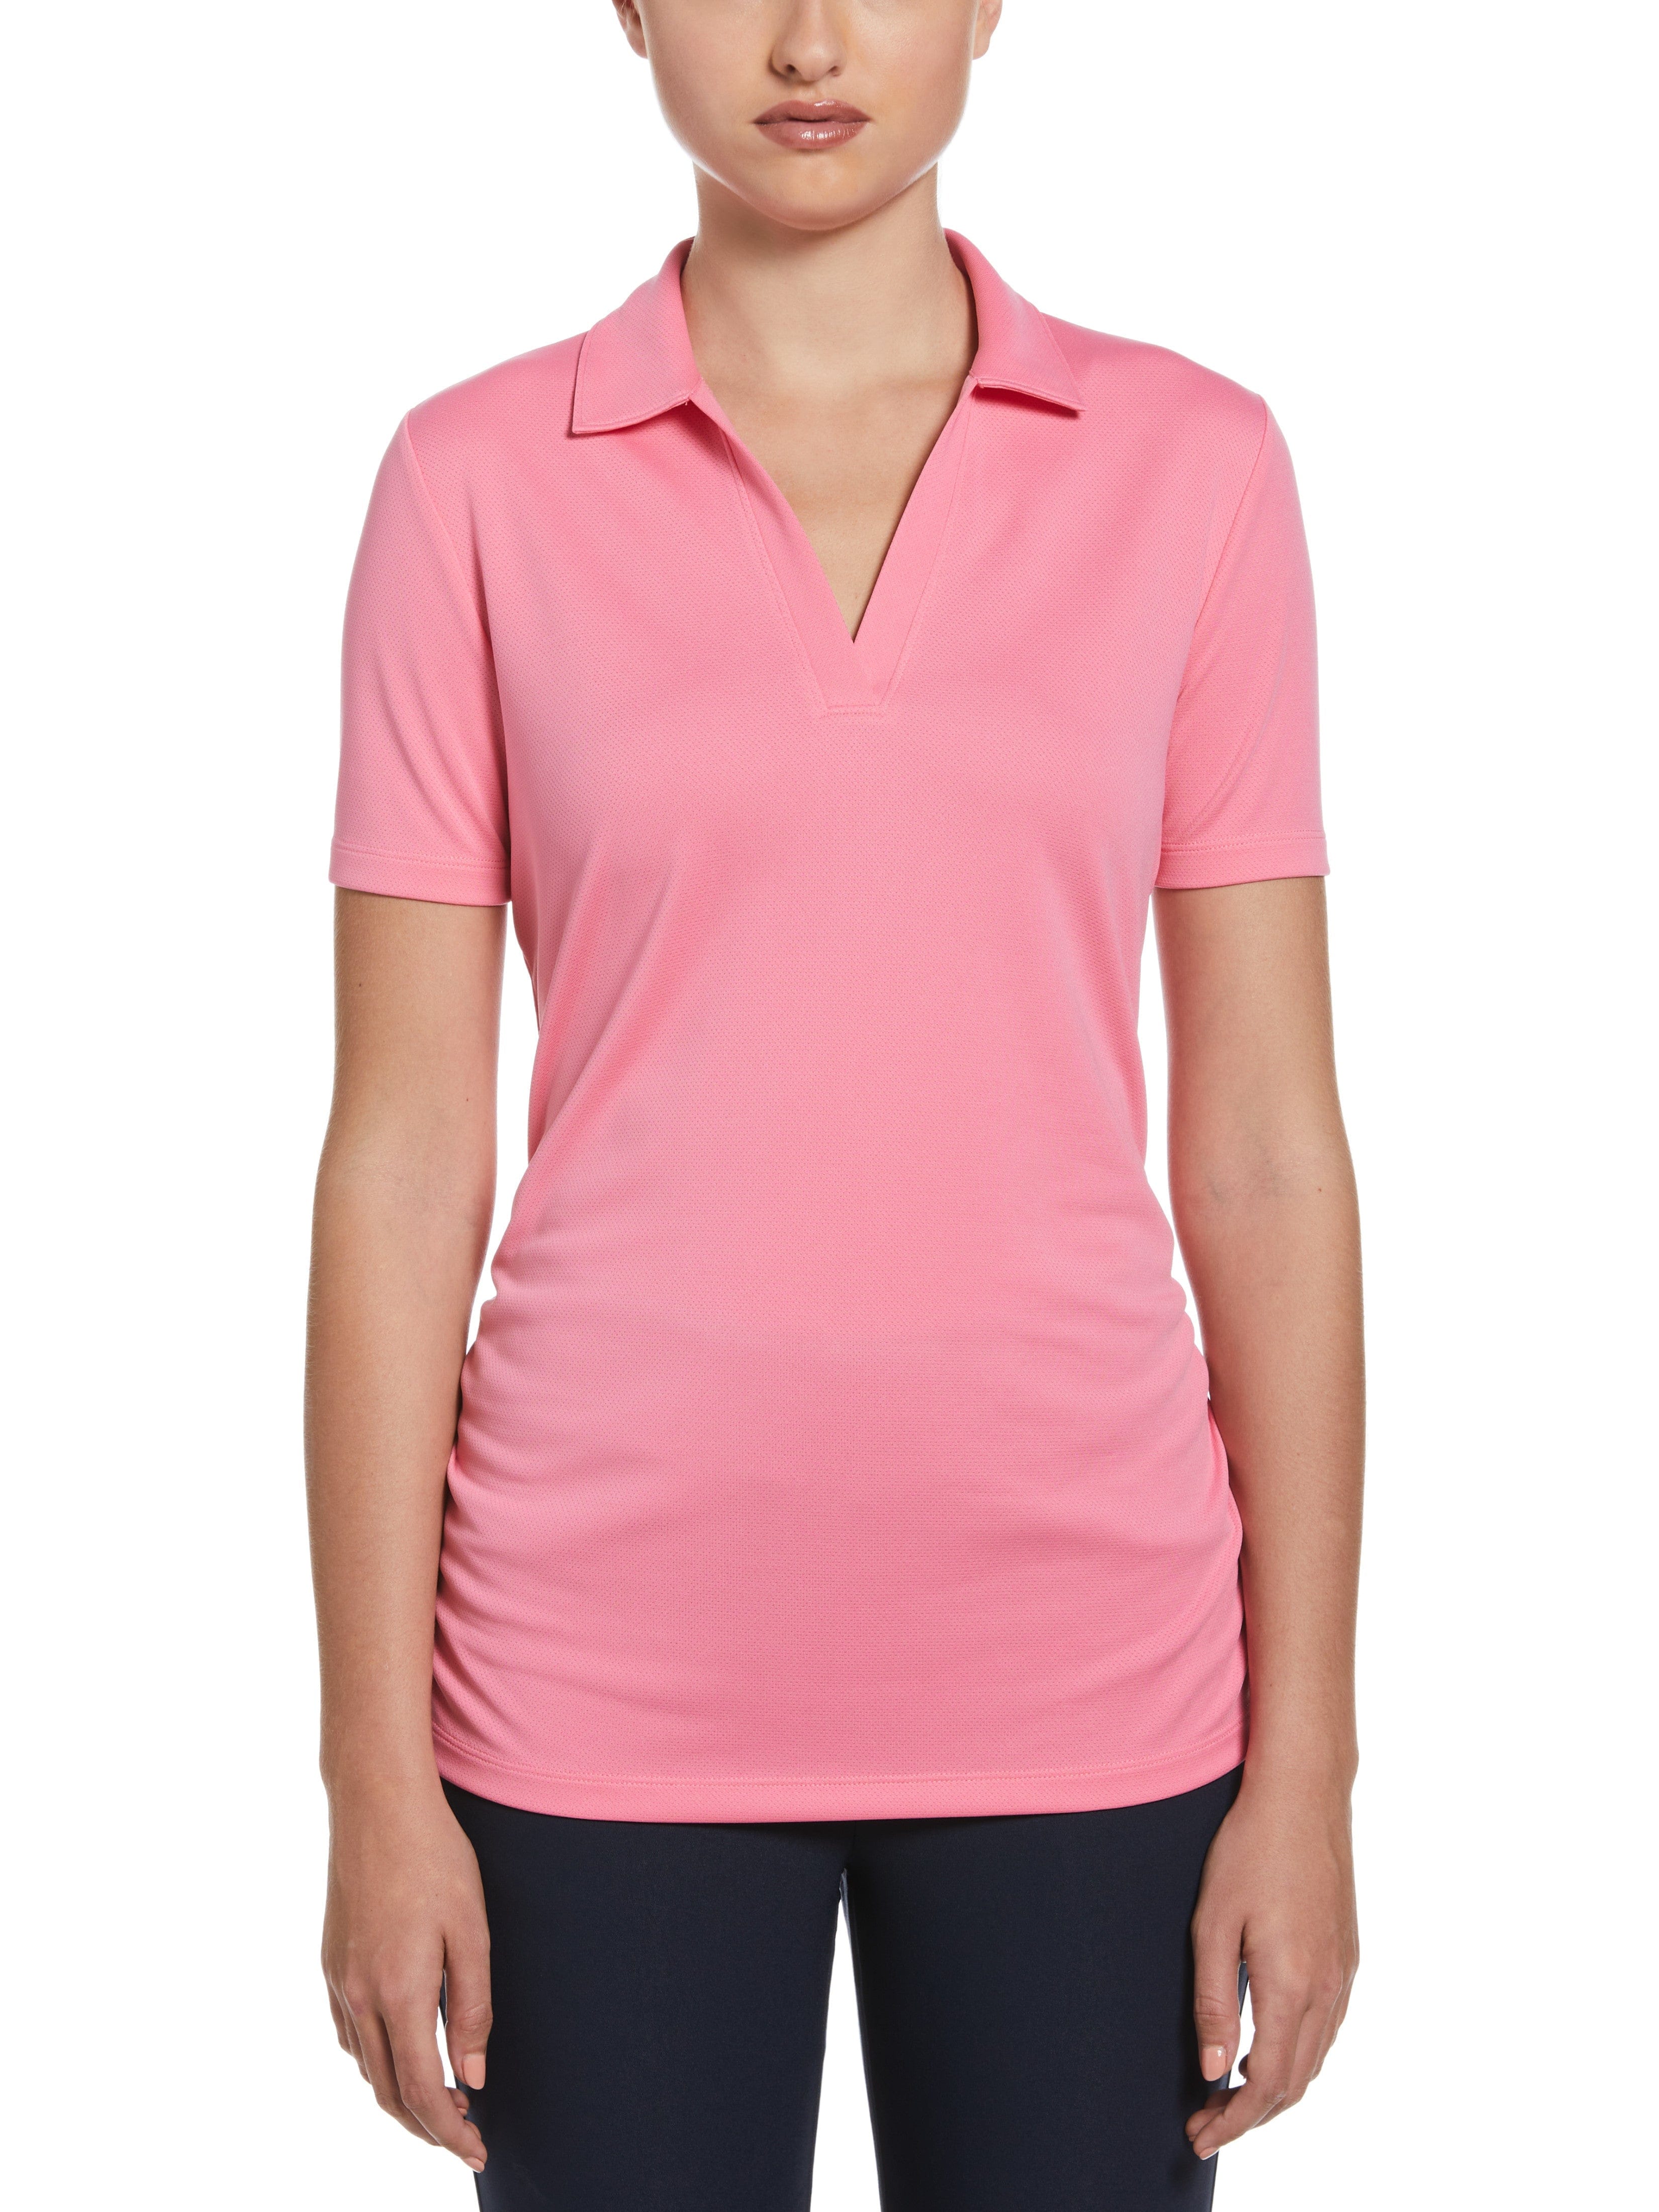 PGA TOUR Apparel Womens AirFlux™ Solid Golf Polo Shirt, Size Small, Flowering Ginger Pink, 100% Polyester | Golf Apparel Shop